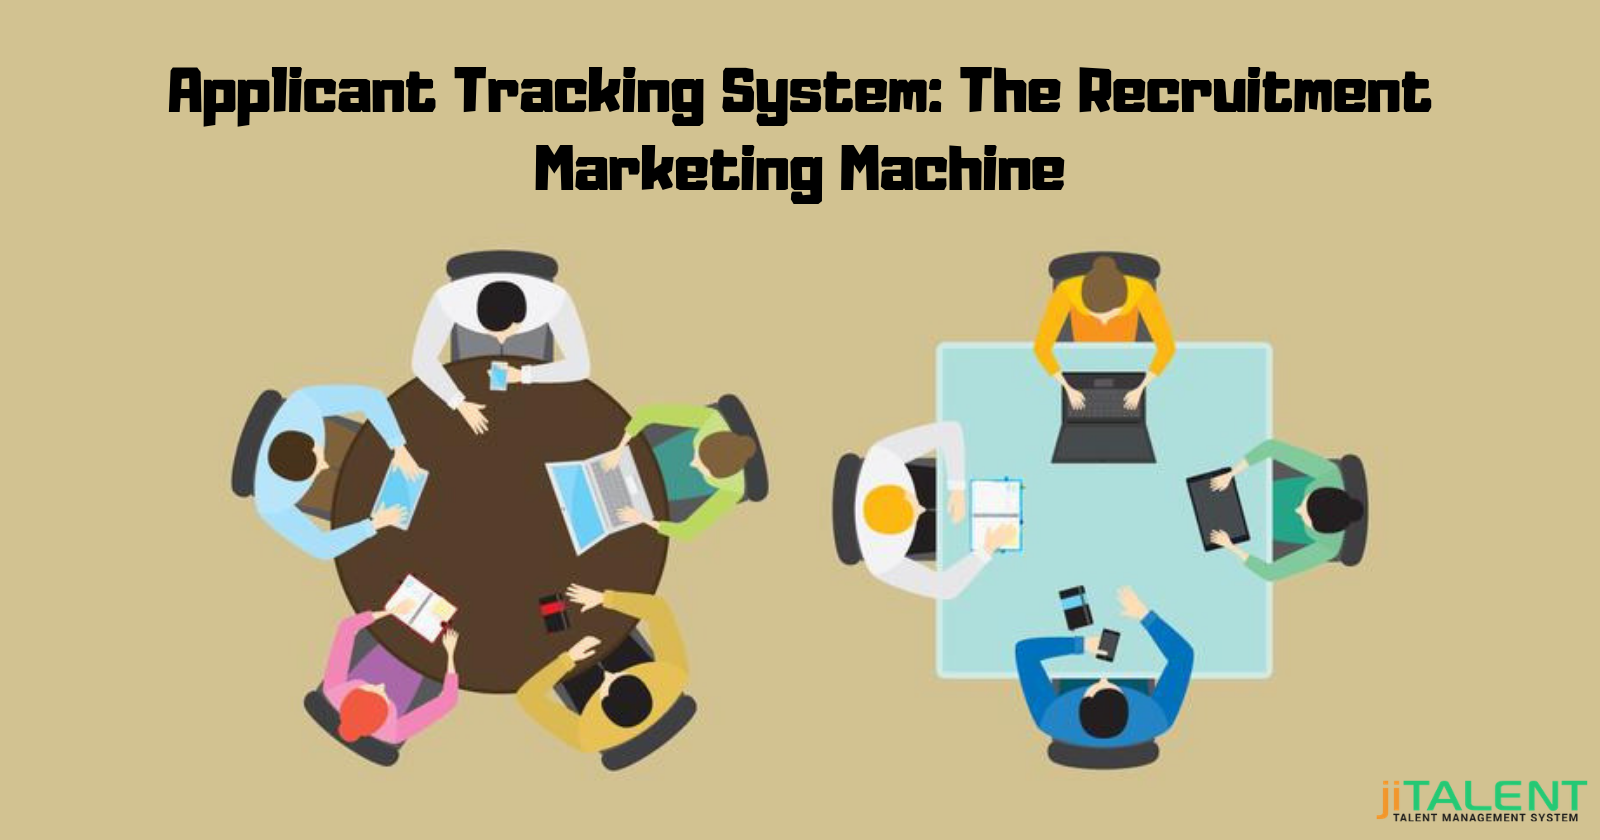 Applicant Tracking System: The Recruitment Marketing Machine